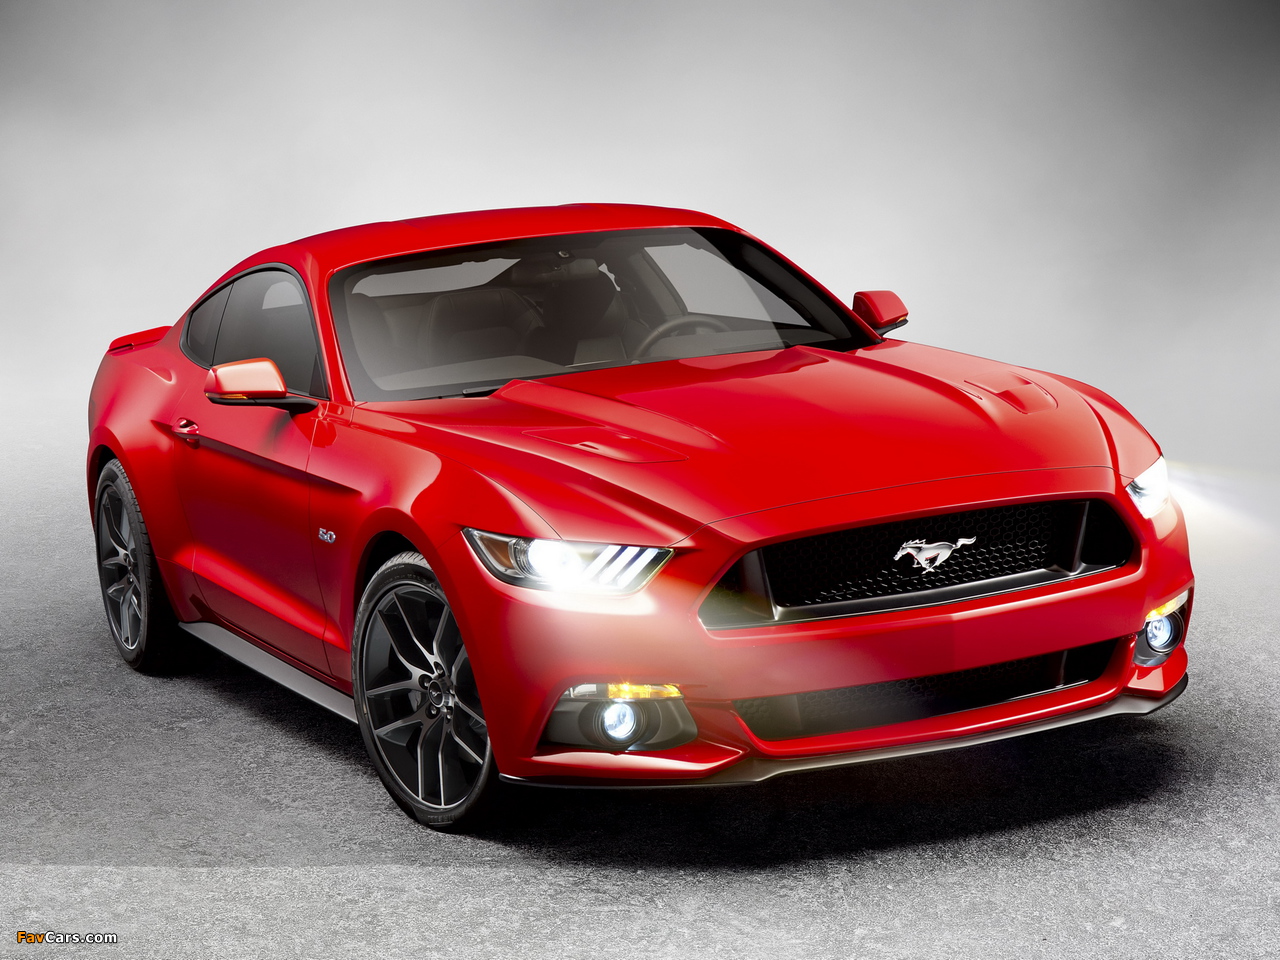 Ford Mustang GT - Car and Driver